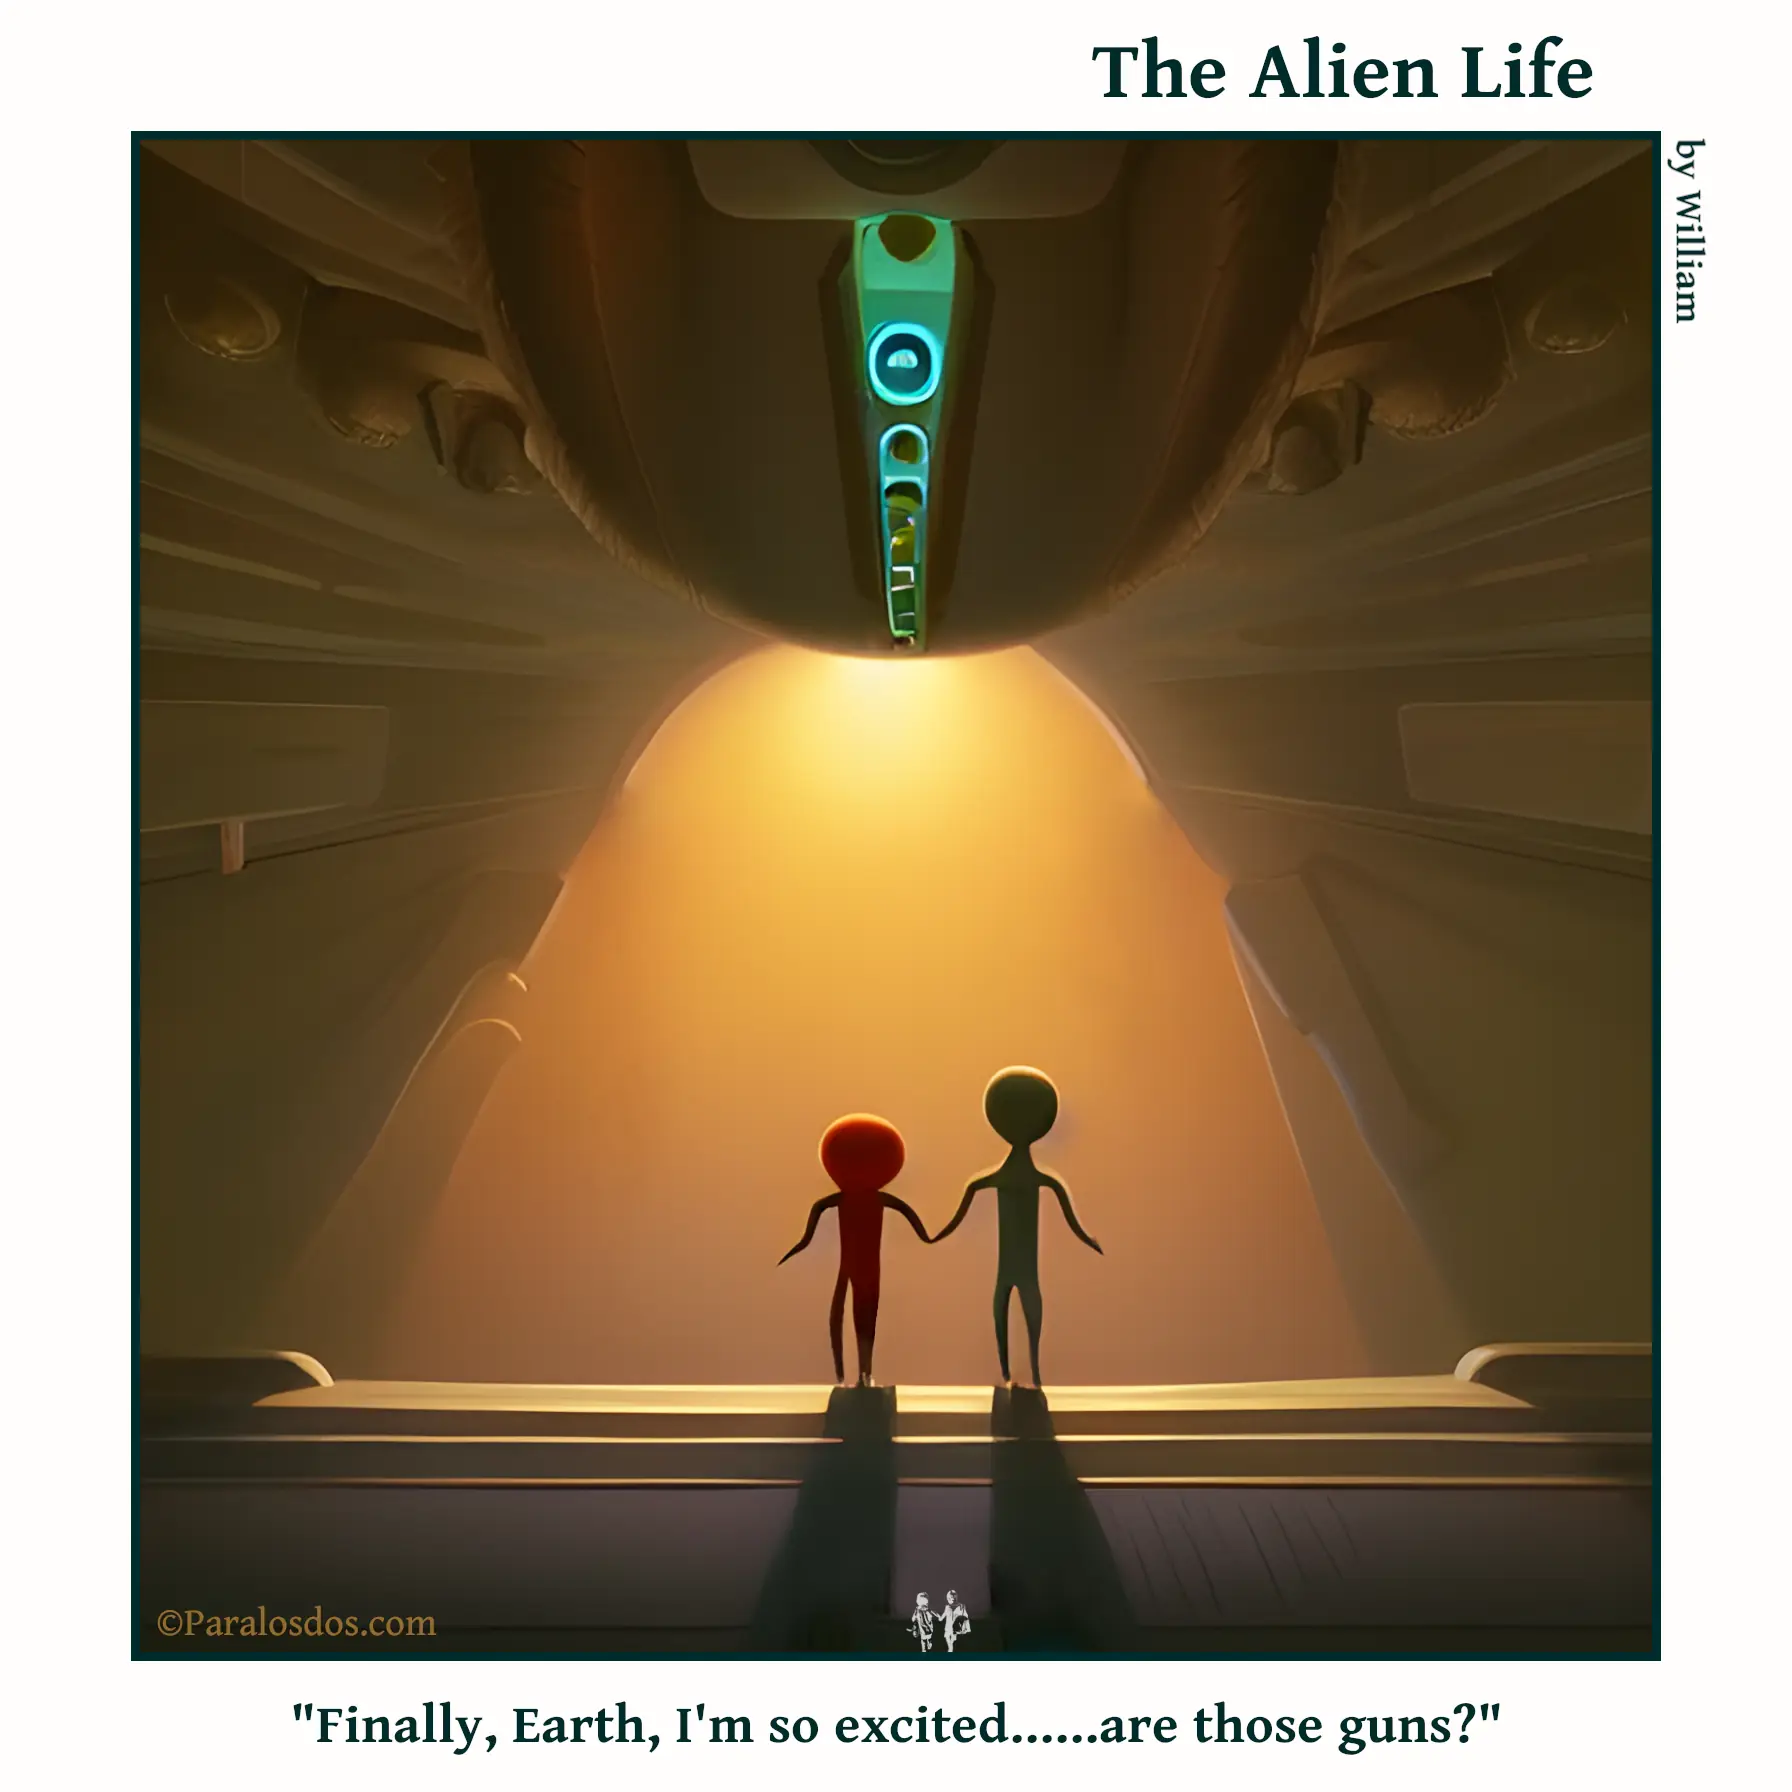 The Alien Life, one panel Comic. Two aliens are leaving a spaceship hand in hand. We see them from behind at the opening of the ship. The caption reads: "Finally, Earth, I'm so excited......are those guns?"